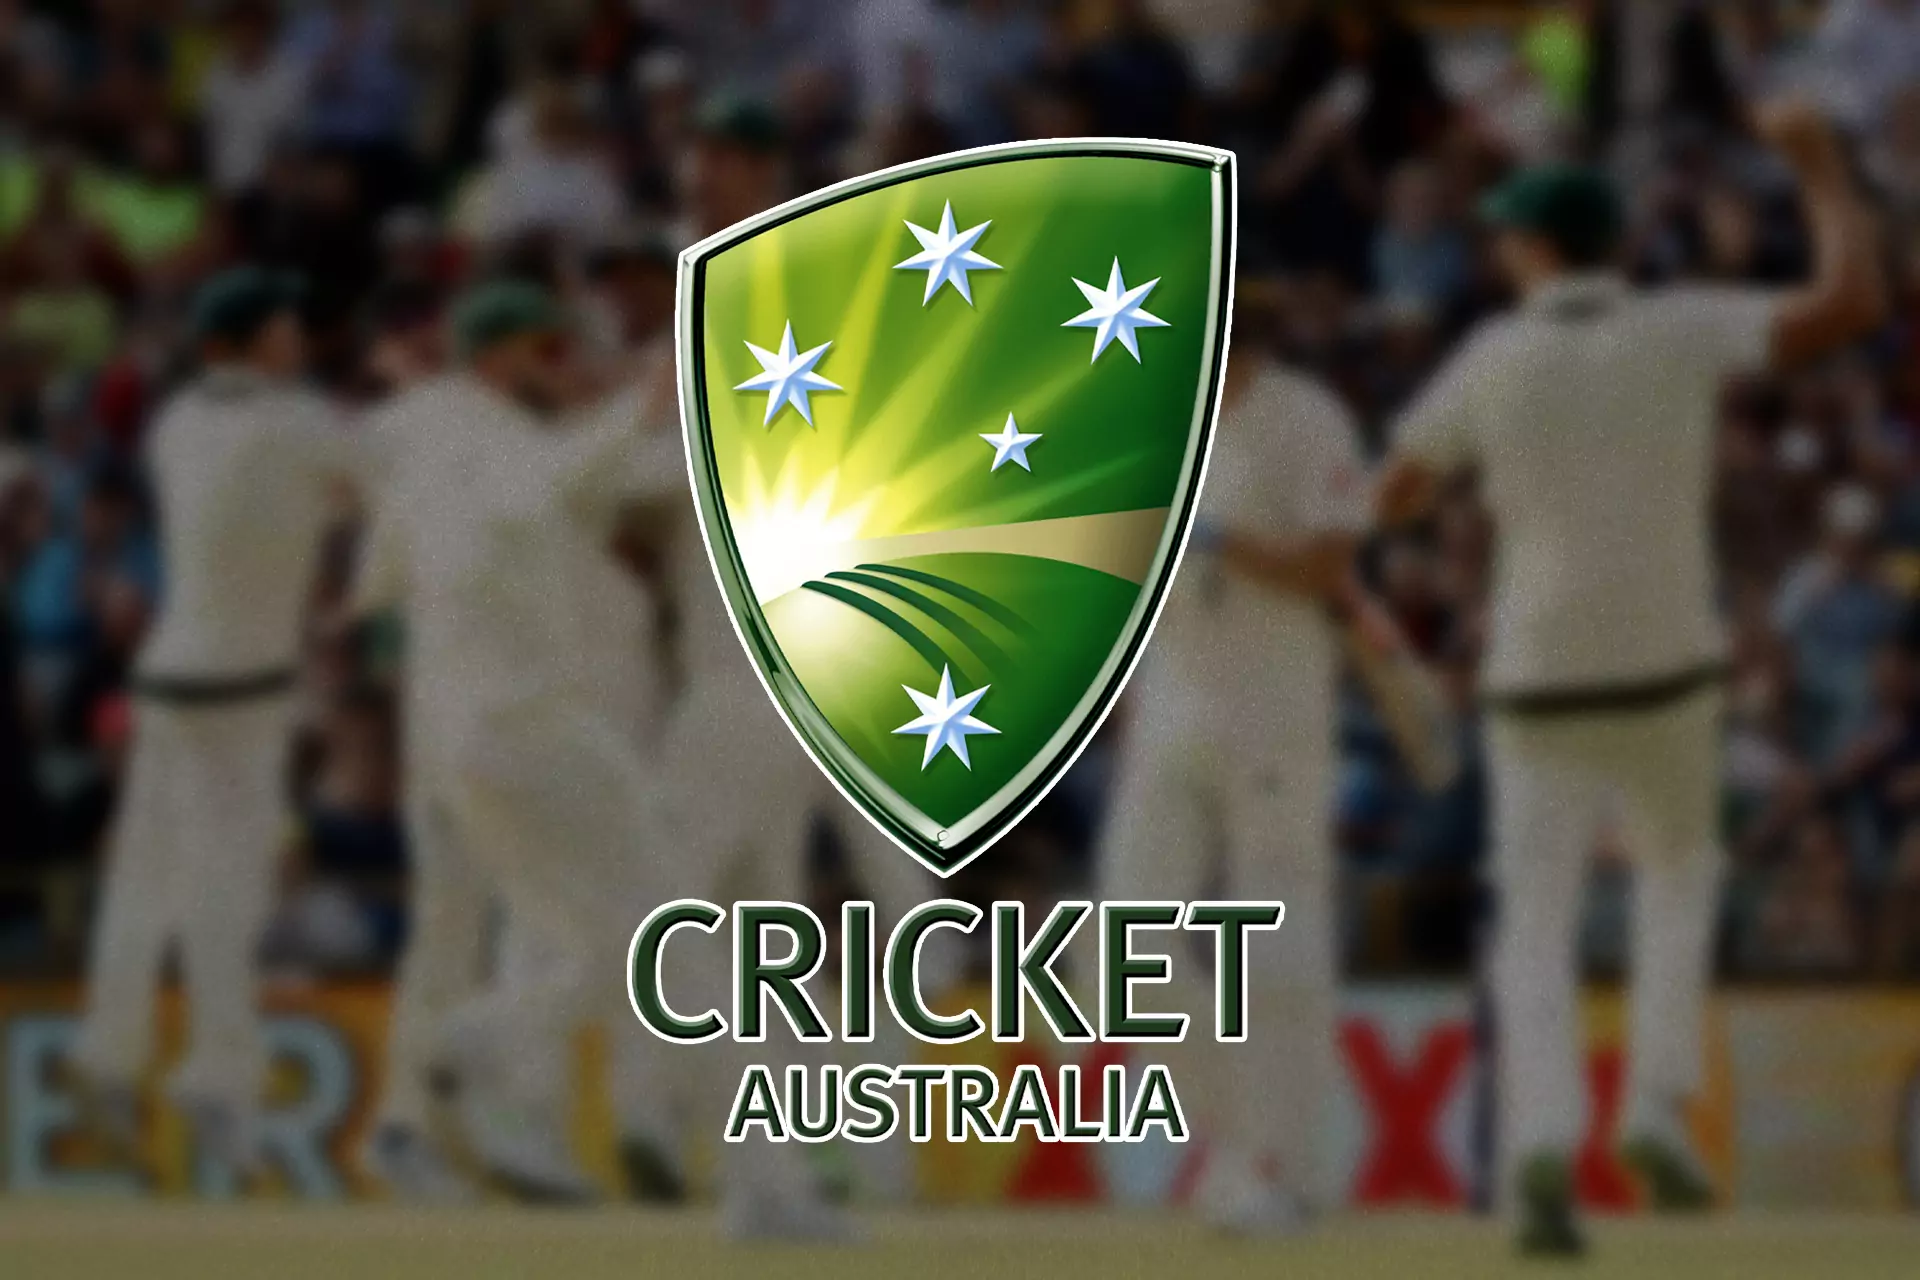 The team of Australia has a long history in the cricket world.